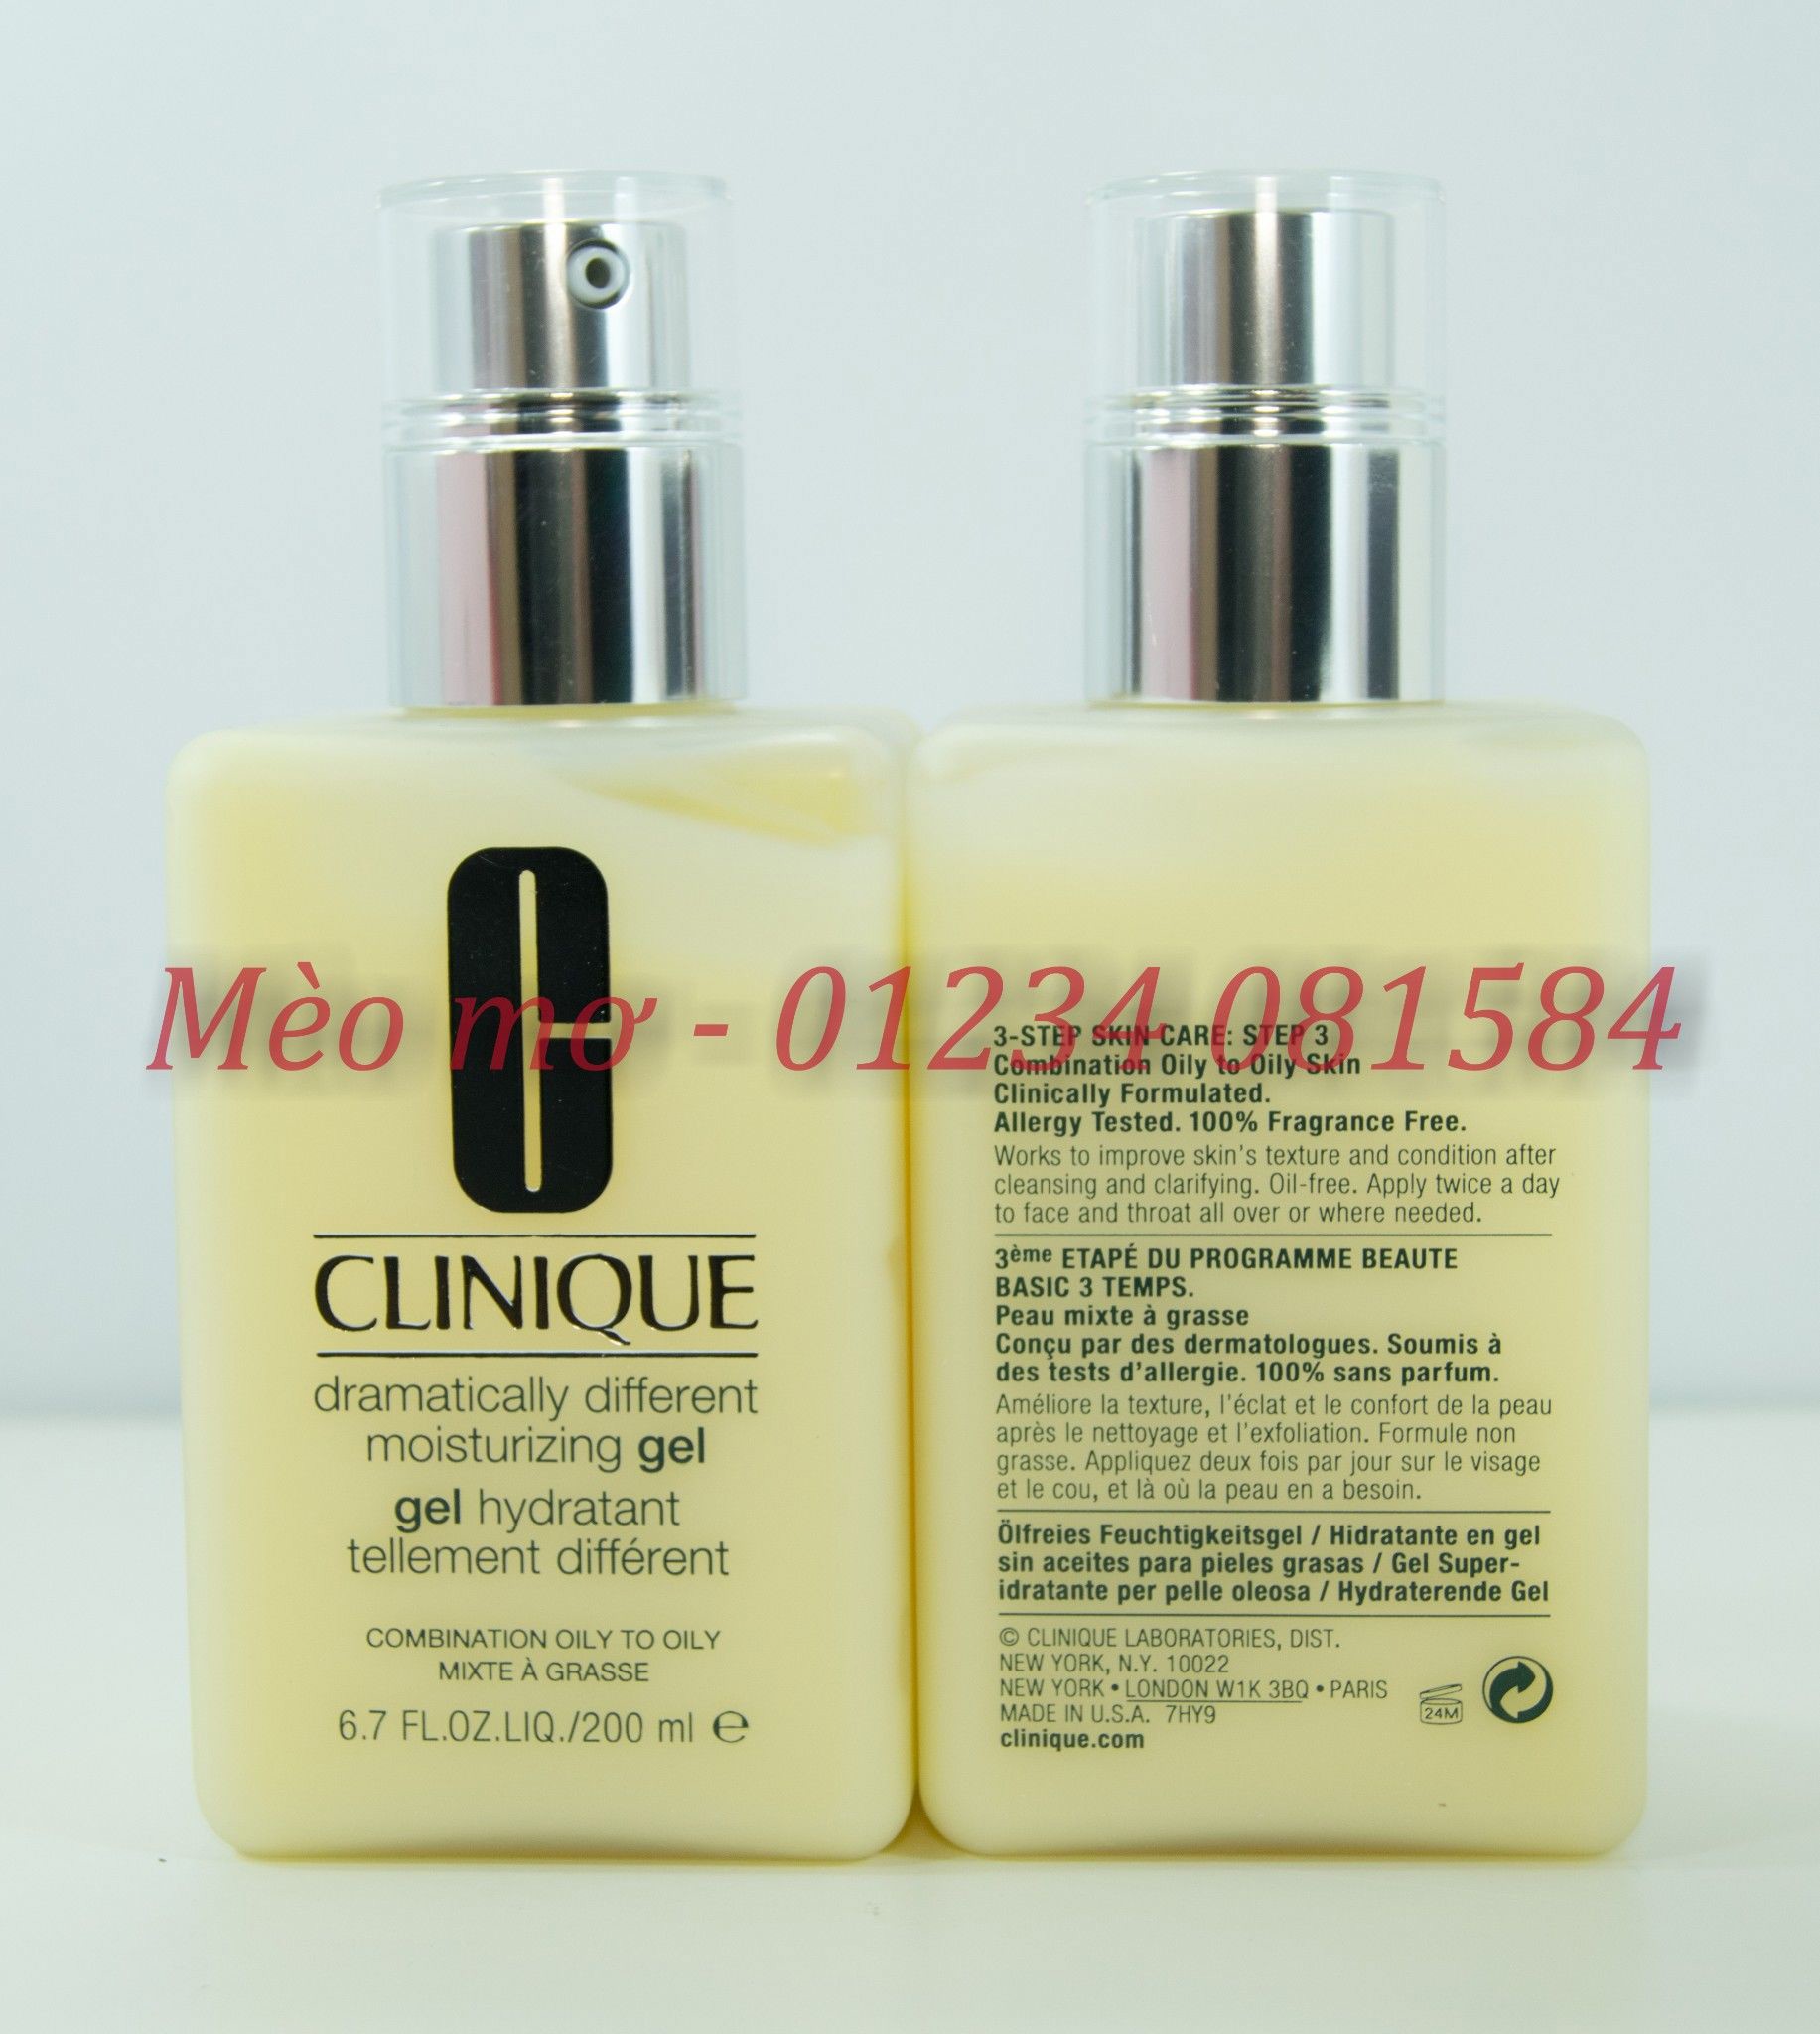 Clinique Dramatically Different Gel